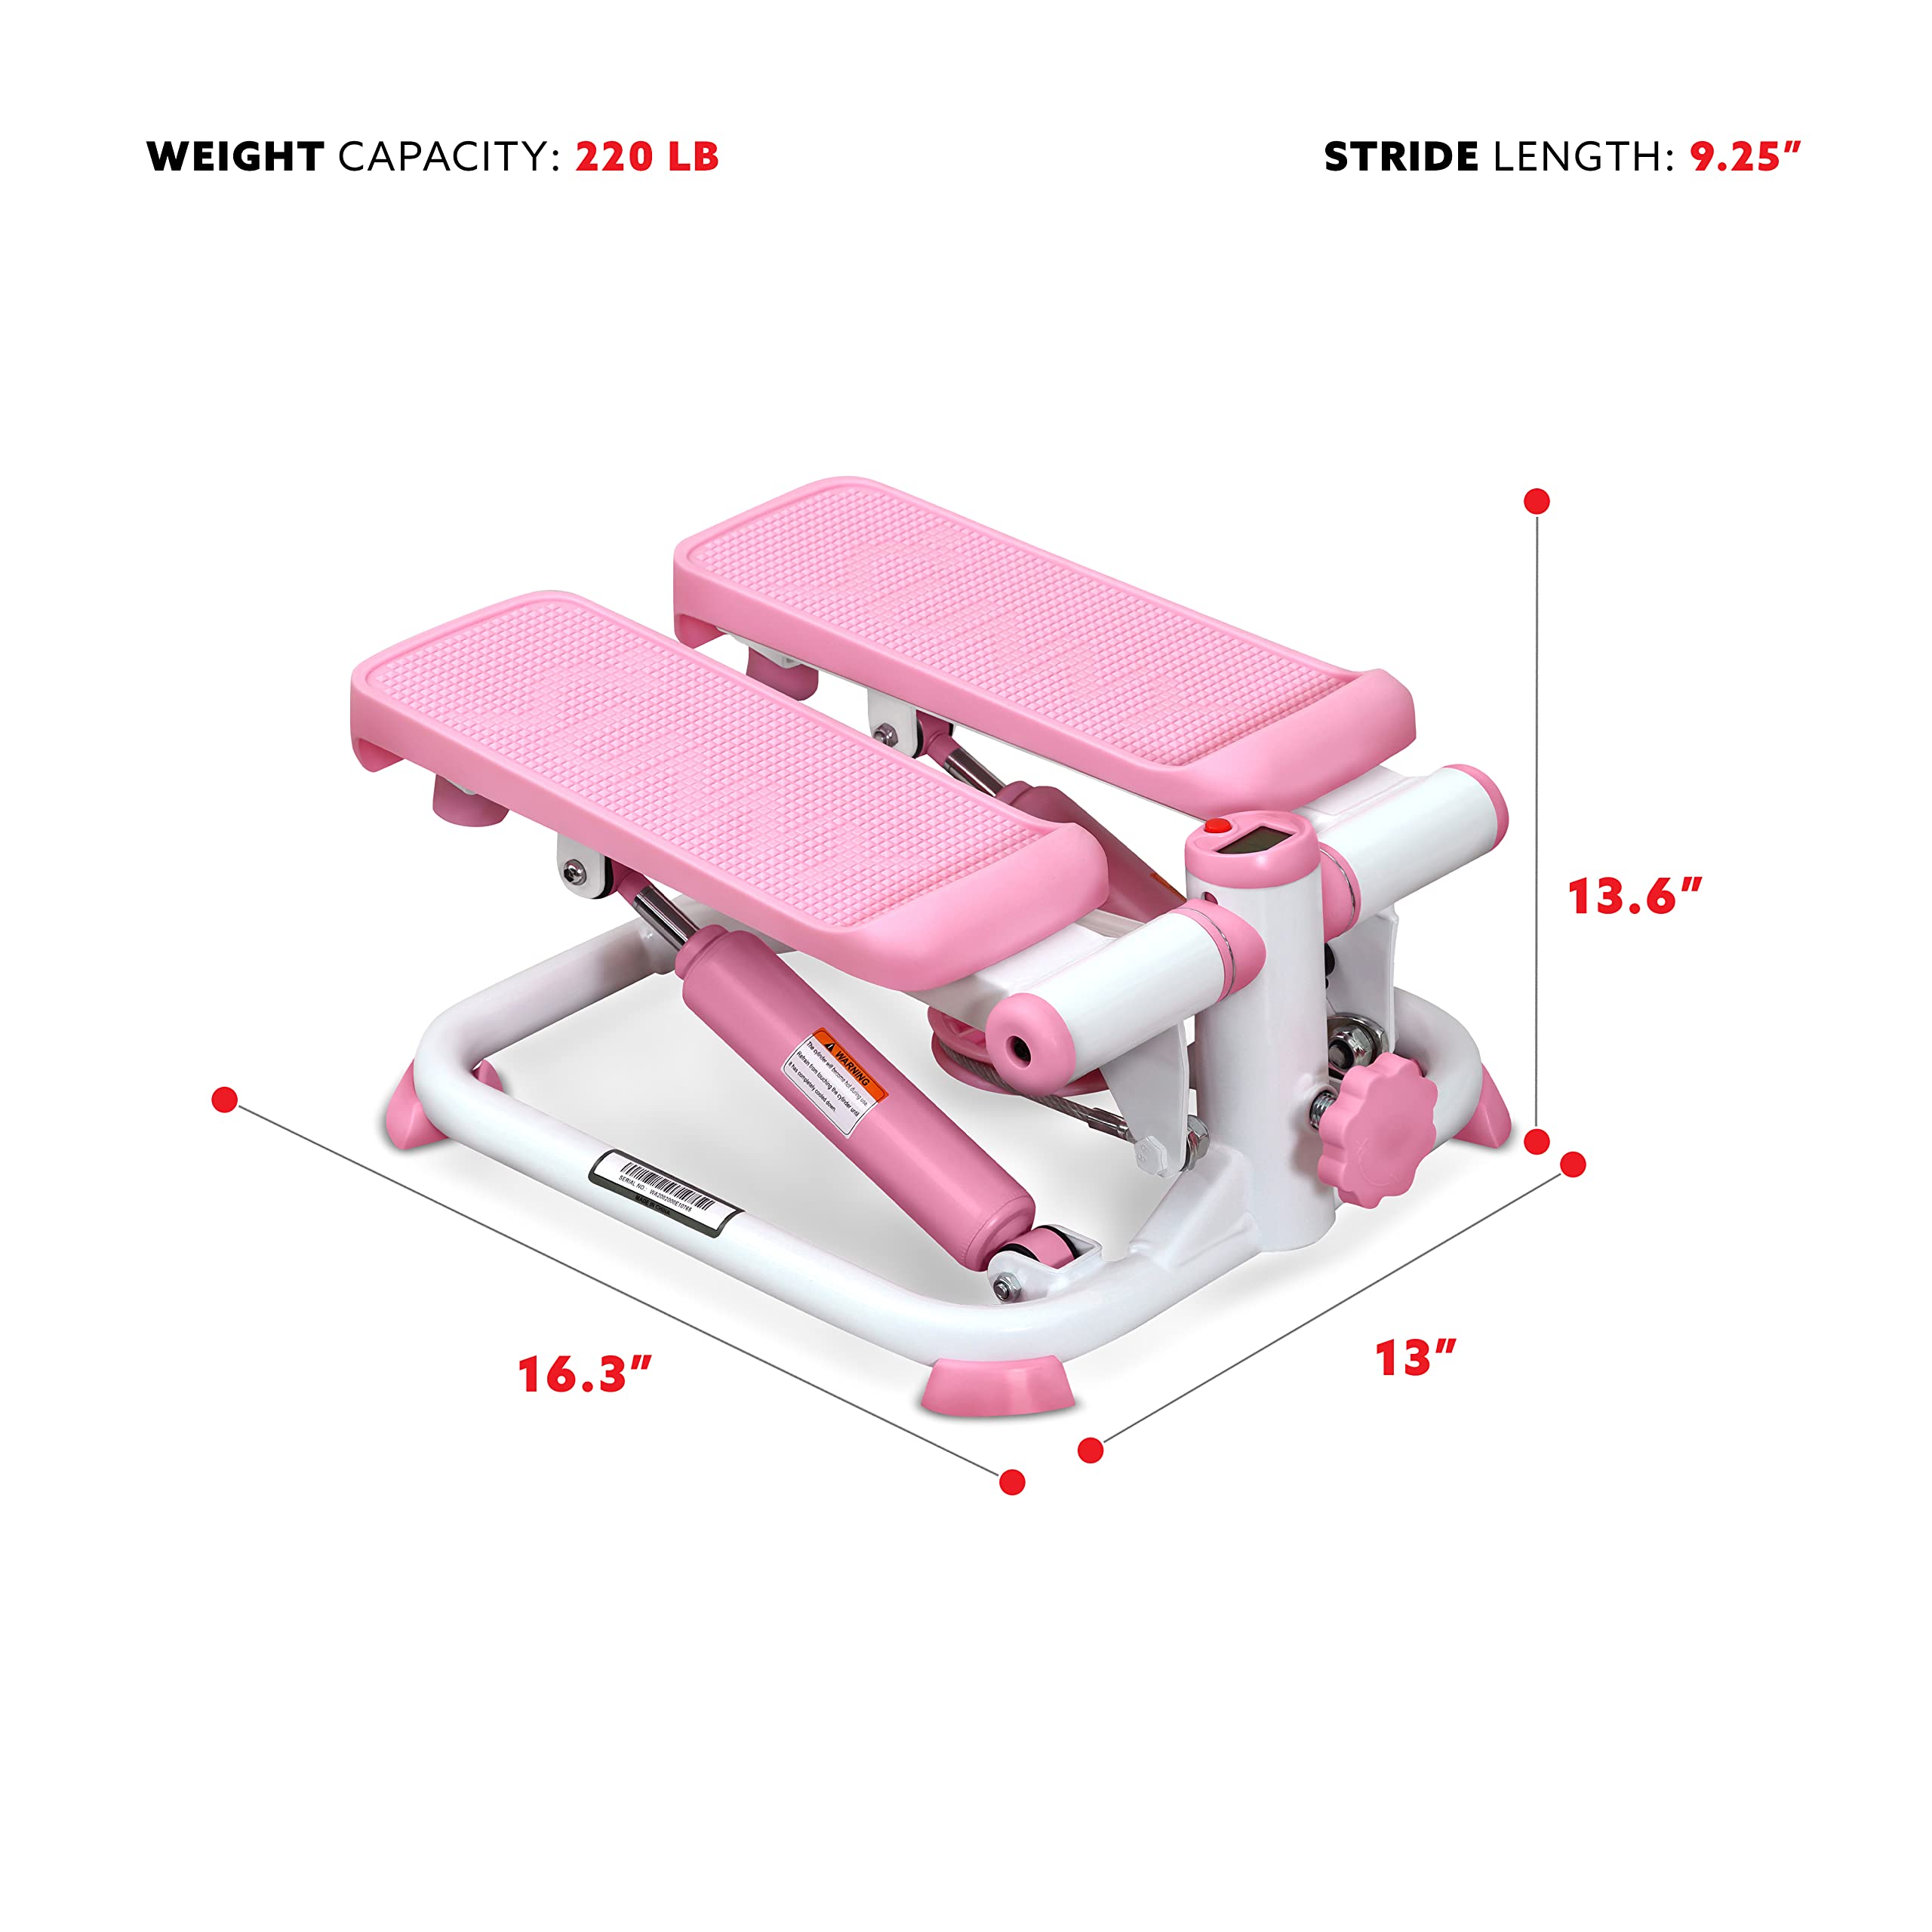 Sunny Health & Fitness Exercise Stepping Machine, Portable Mini Stair Stepper for Home, Desk or Office Workouts in Pink